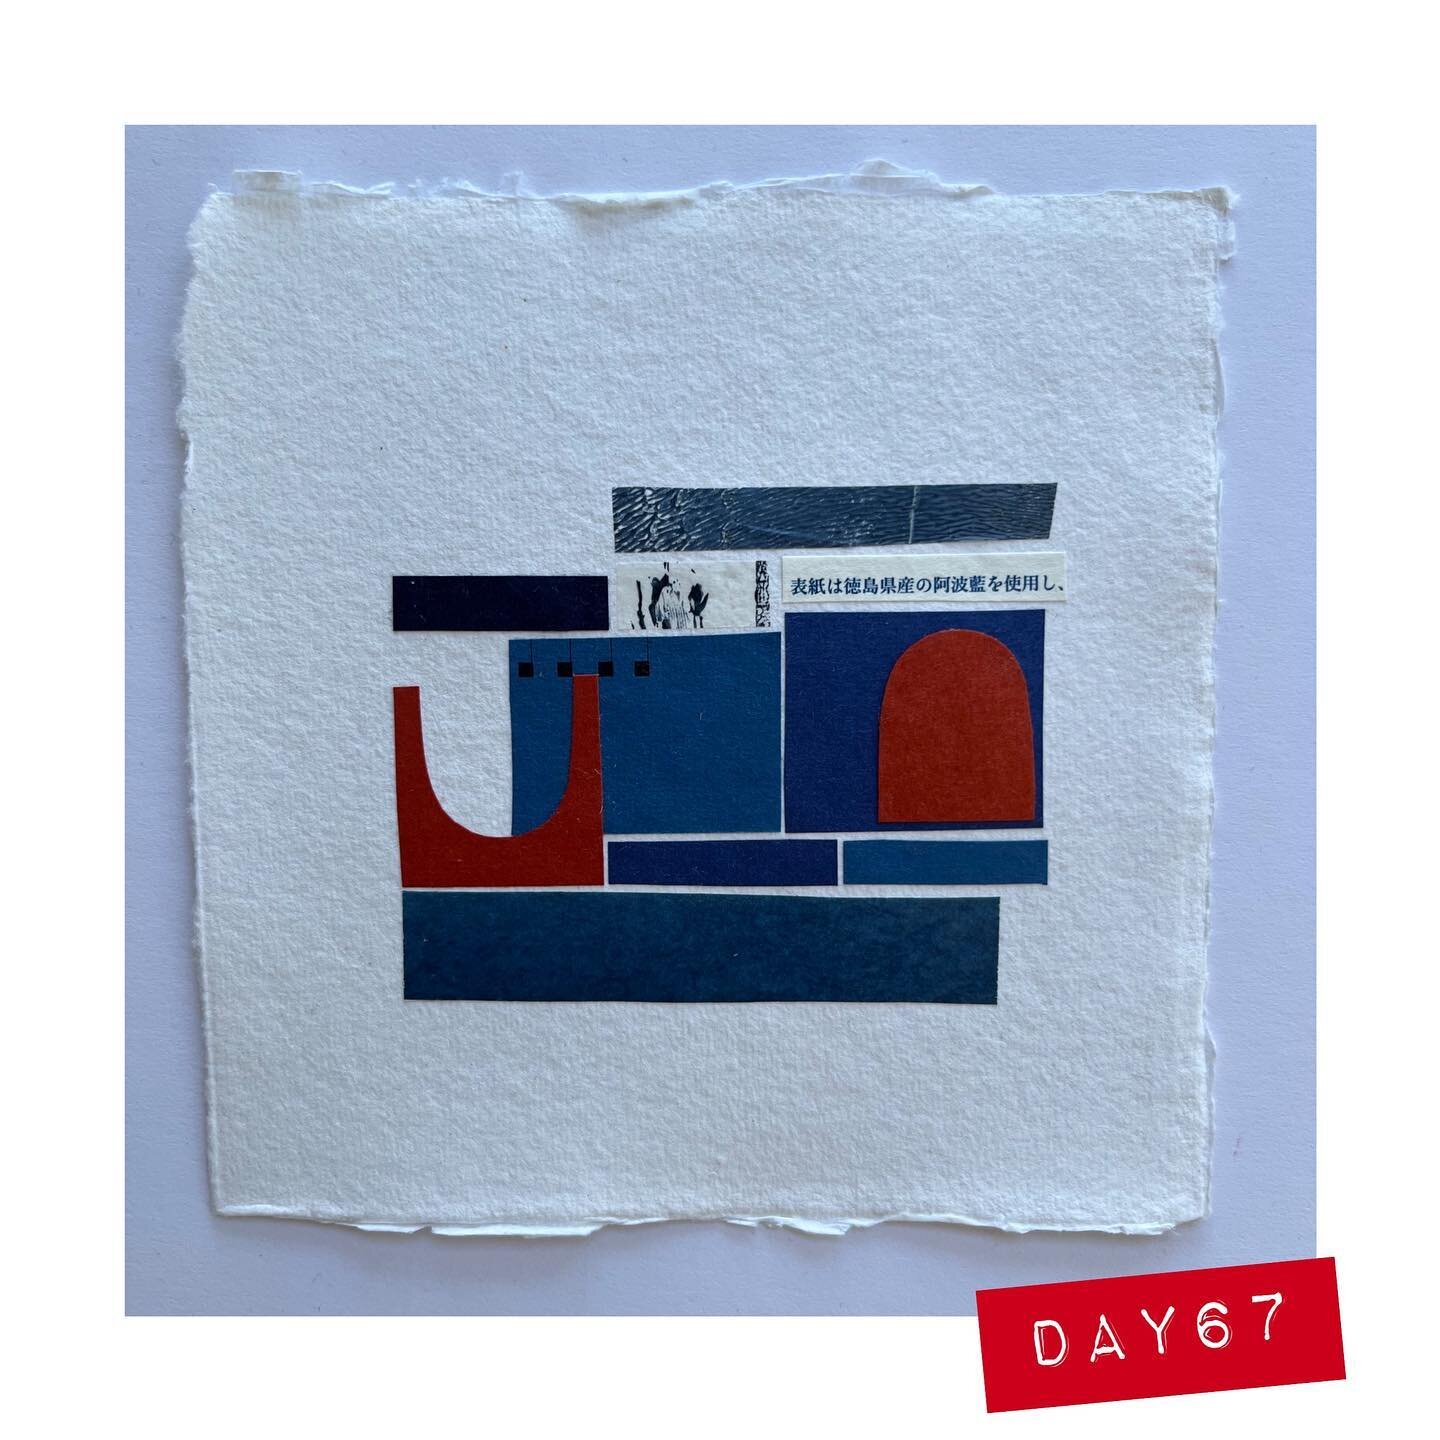 Day 67

A selection of blues 💙

🤍 #100dayproject2023 #the100dayproject #cqpapercollage #paperplay #gelliplate #gelliplateprinting #collage #collageart #paperart #creativeart #collageonpaper #khadipaper